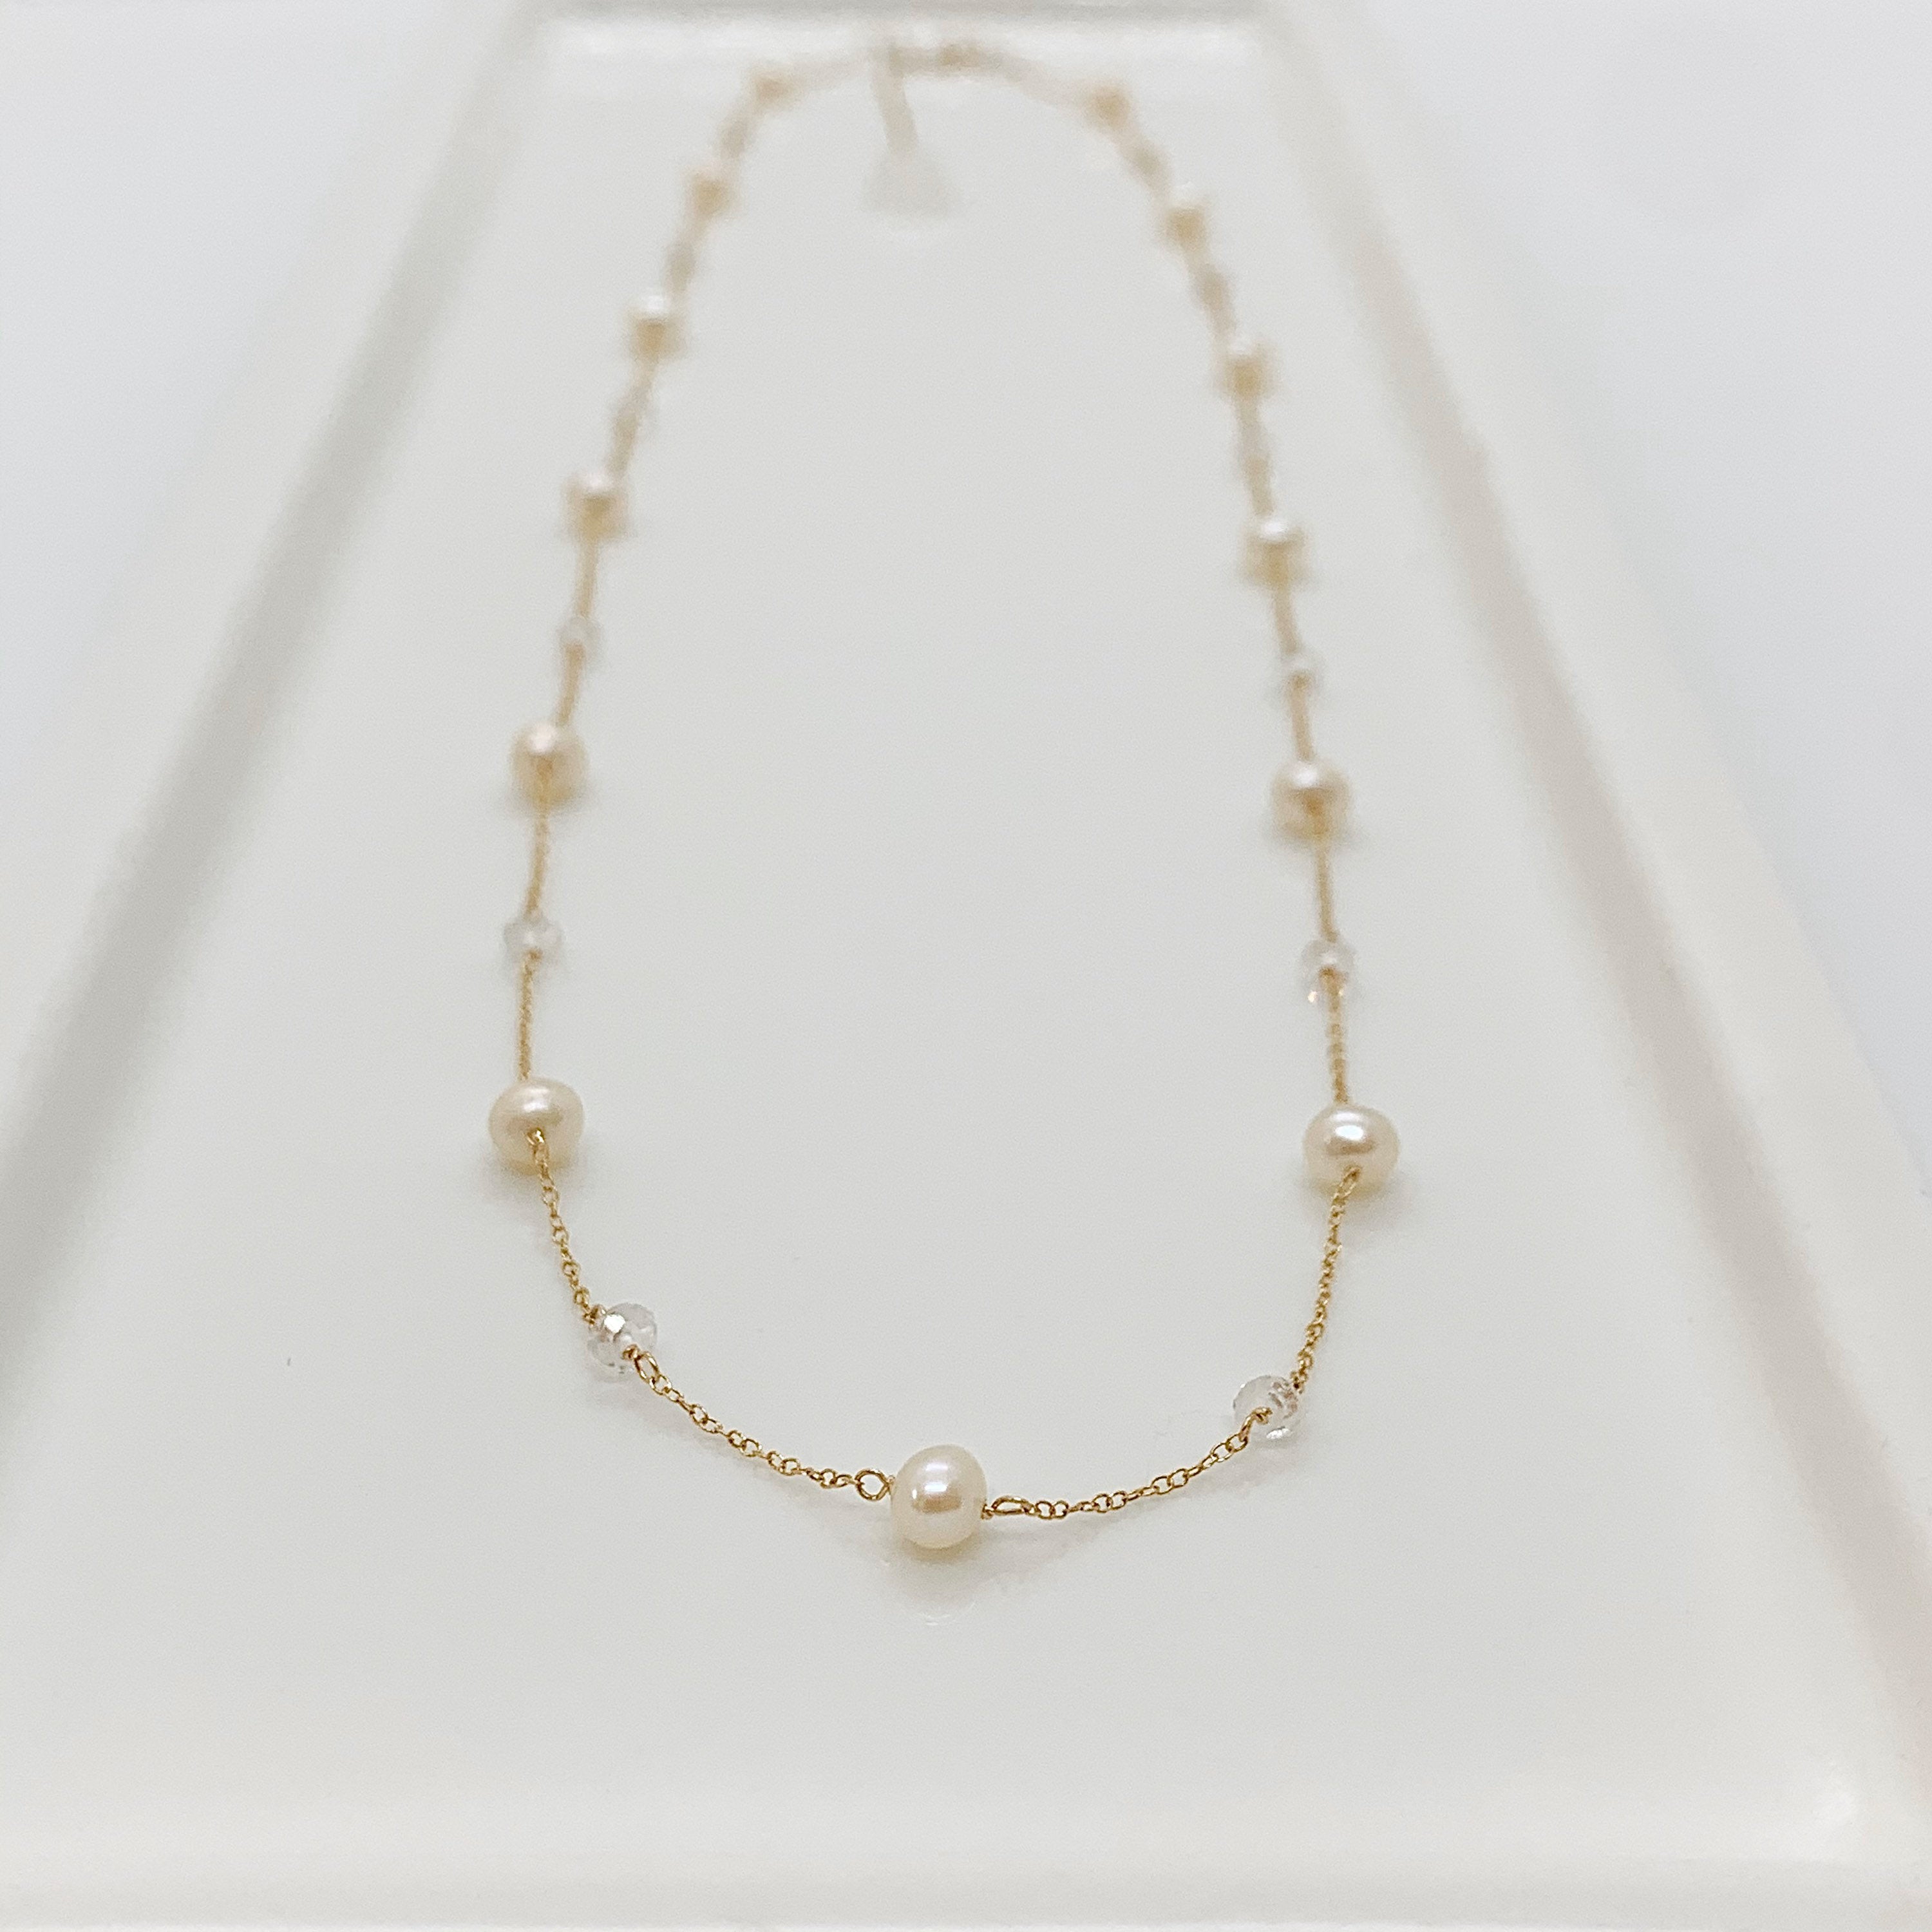 14k Gold Chain Necklace w/ Freshwater Pearls & Moonstone